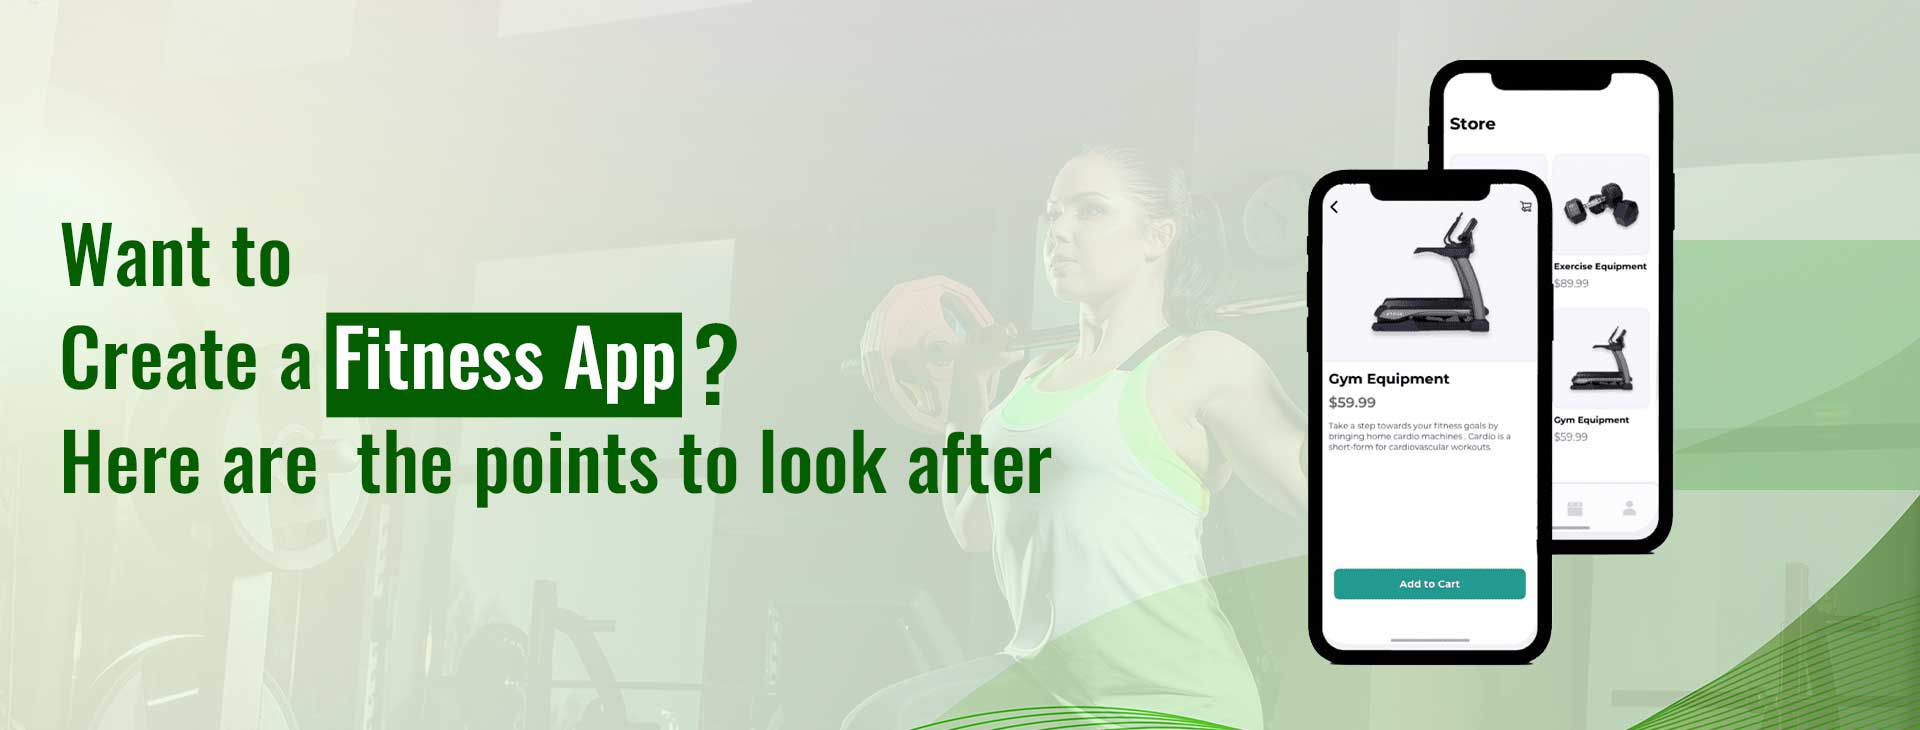 Want to Create a Fitness App - Here are the Points to Look After